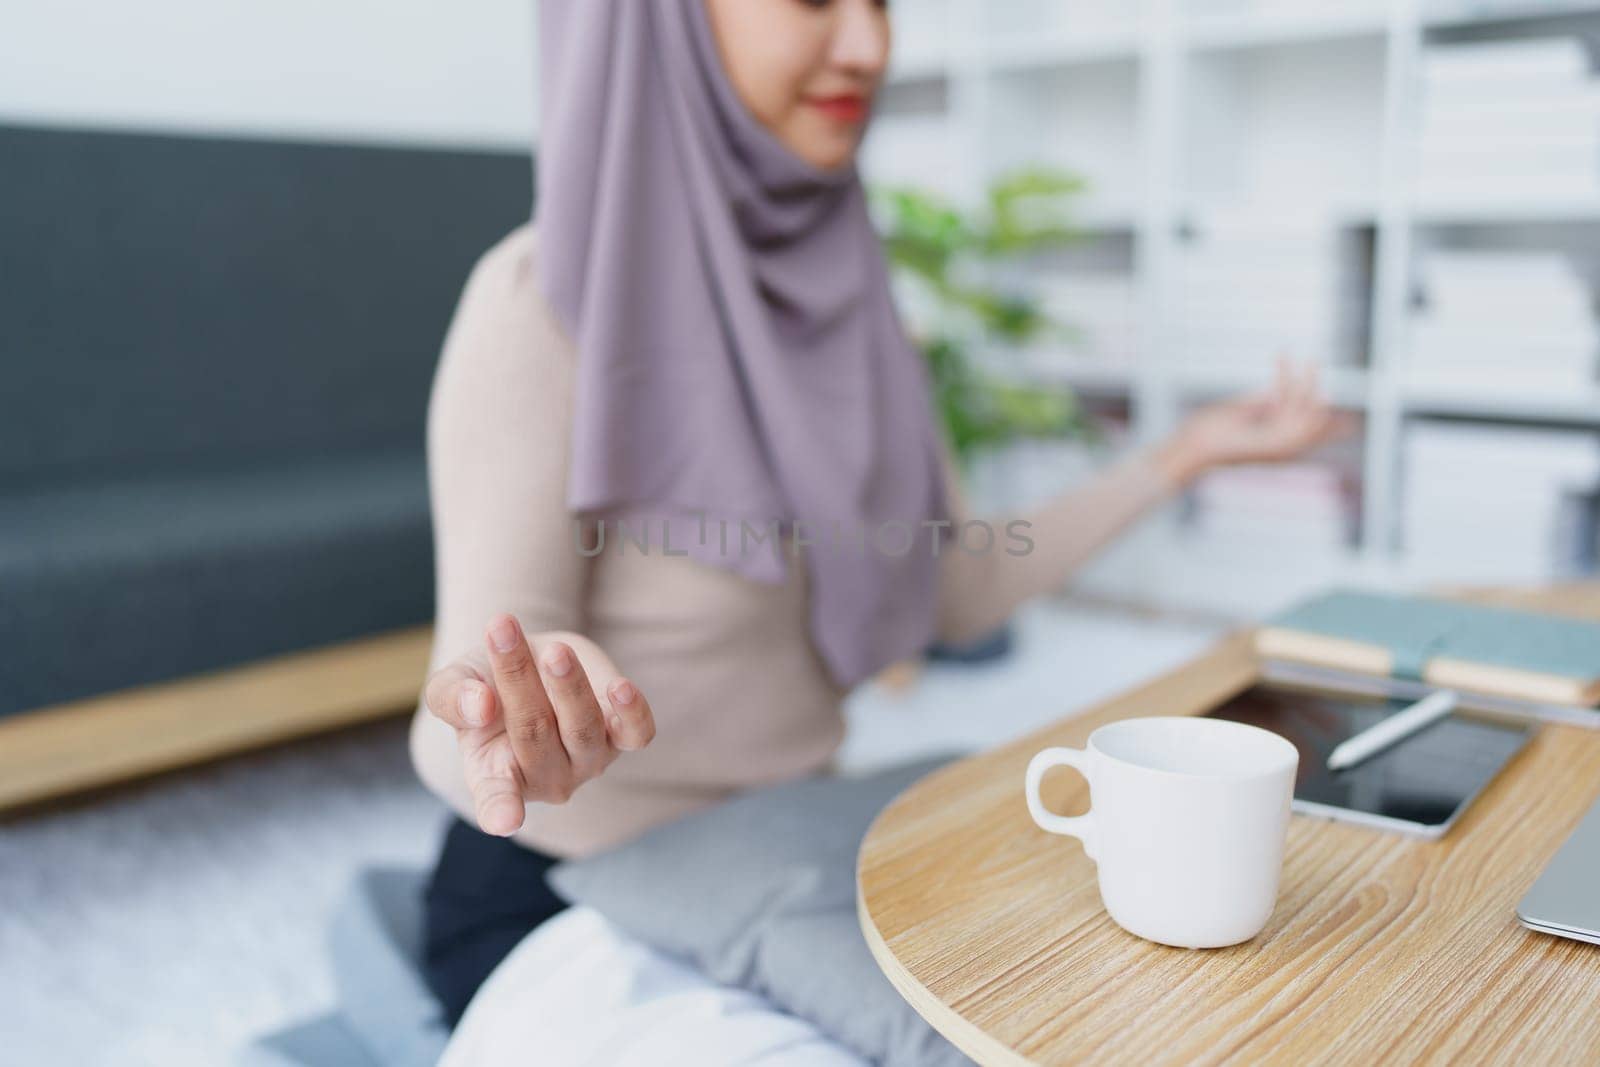 Muslim female employee Meditate while working in the office. by Manastrong